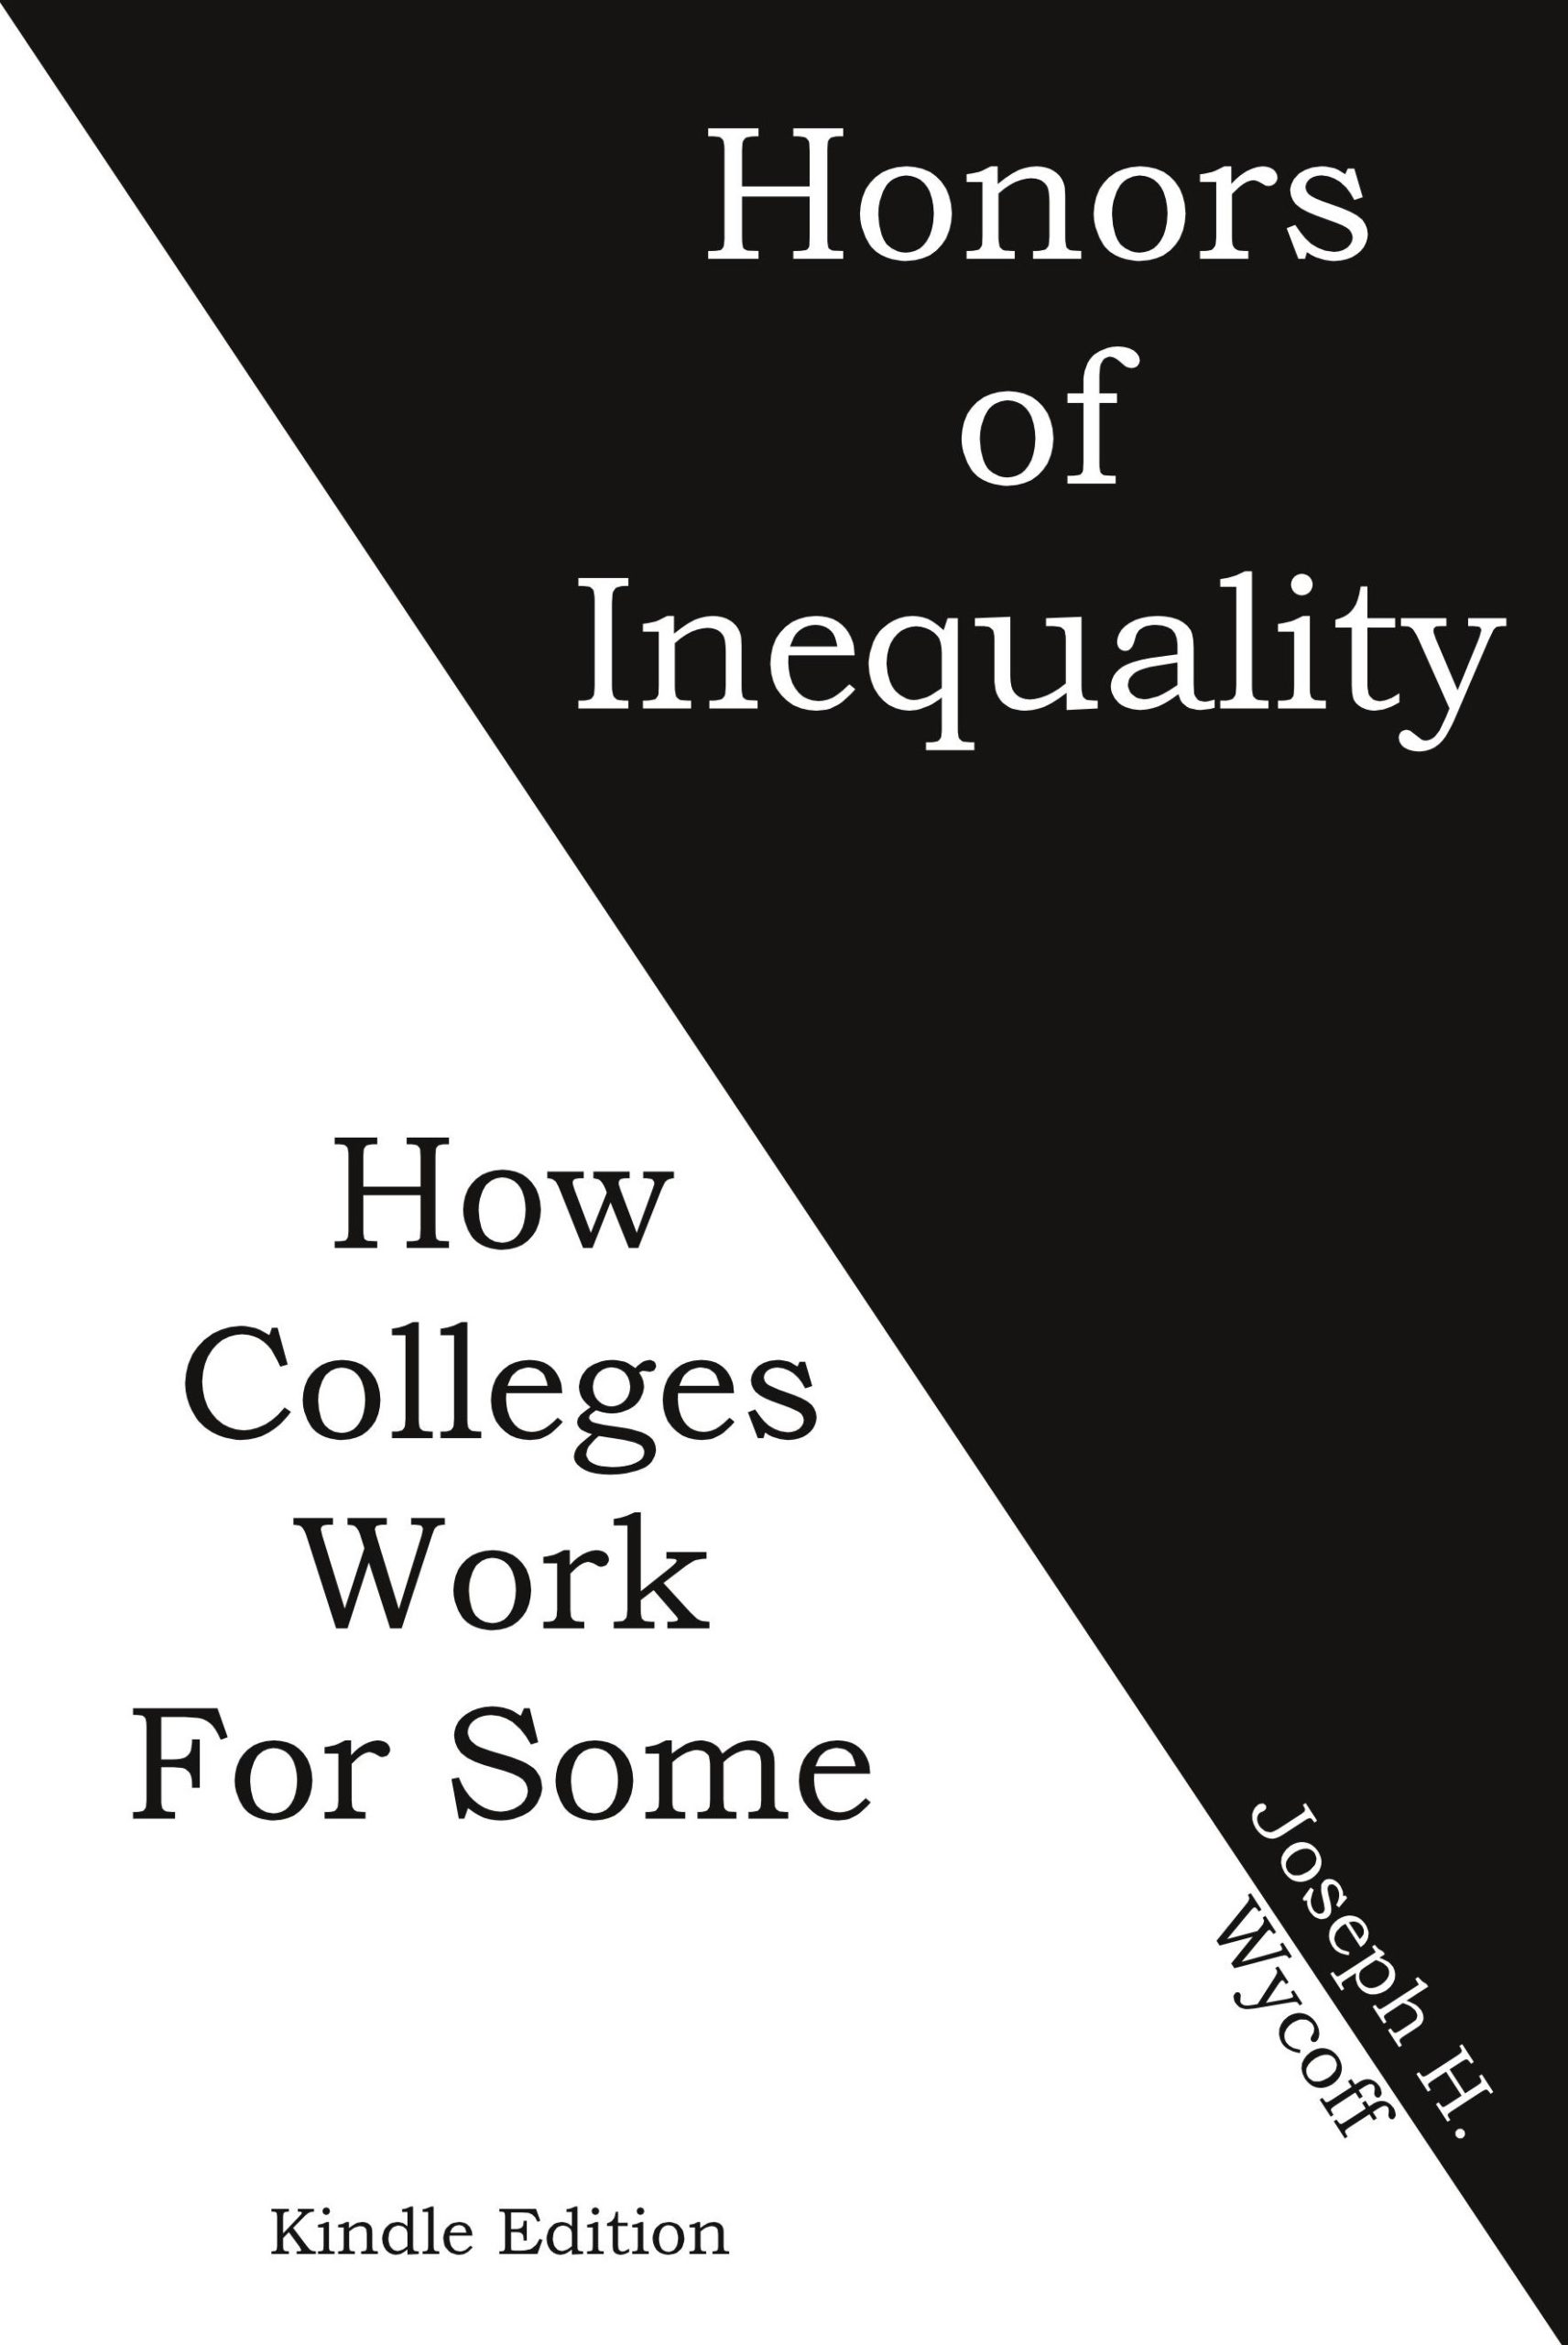 Honors of Inequality | Kindle Edition